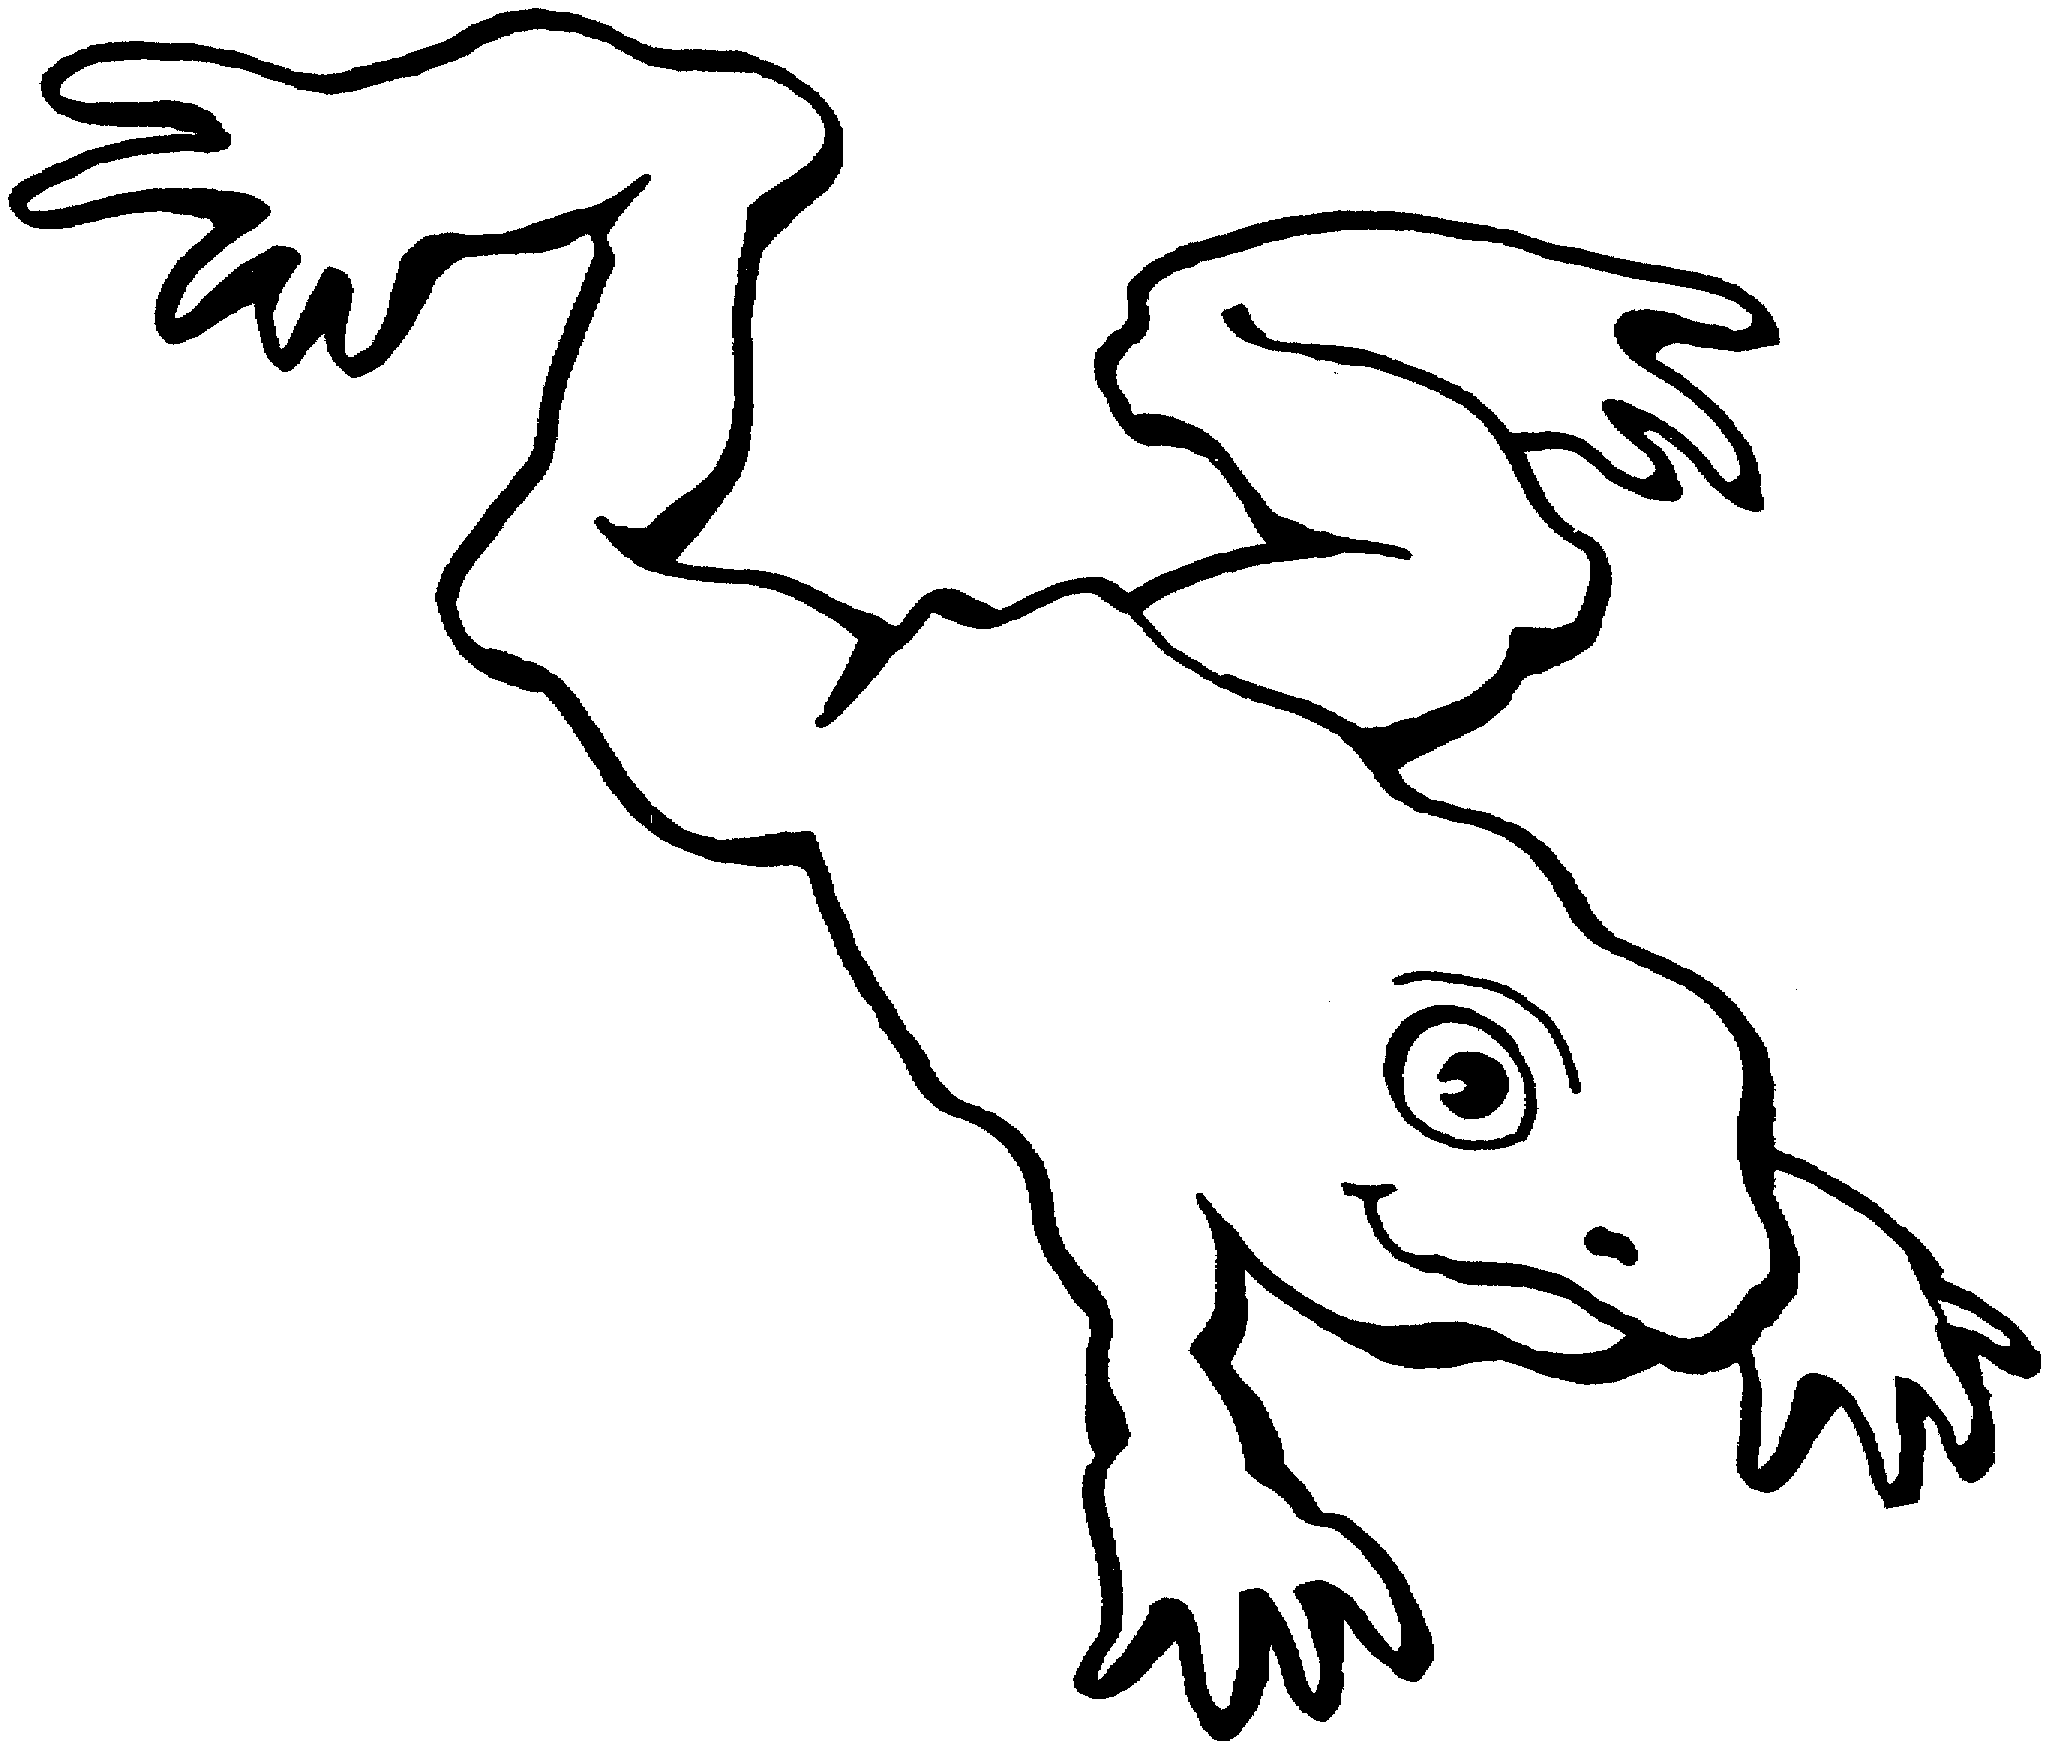 Frog  black and white clipart frog jumping